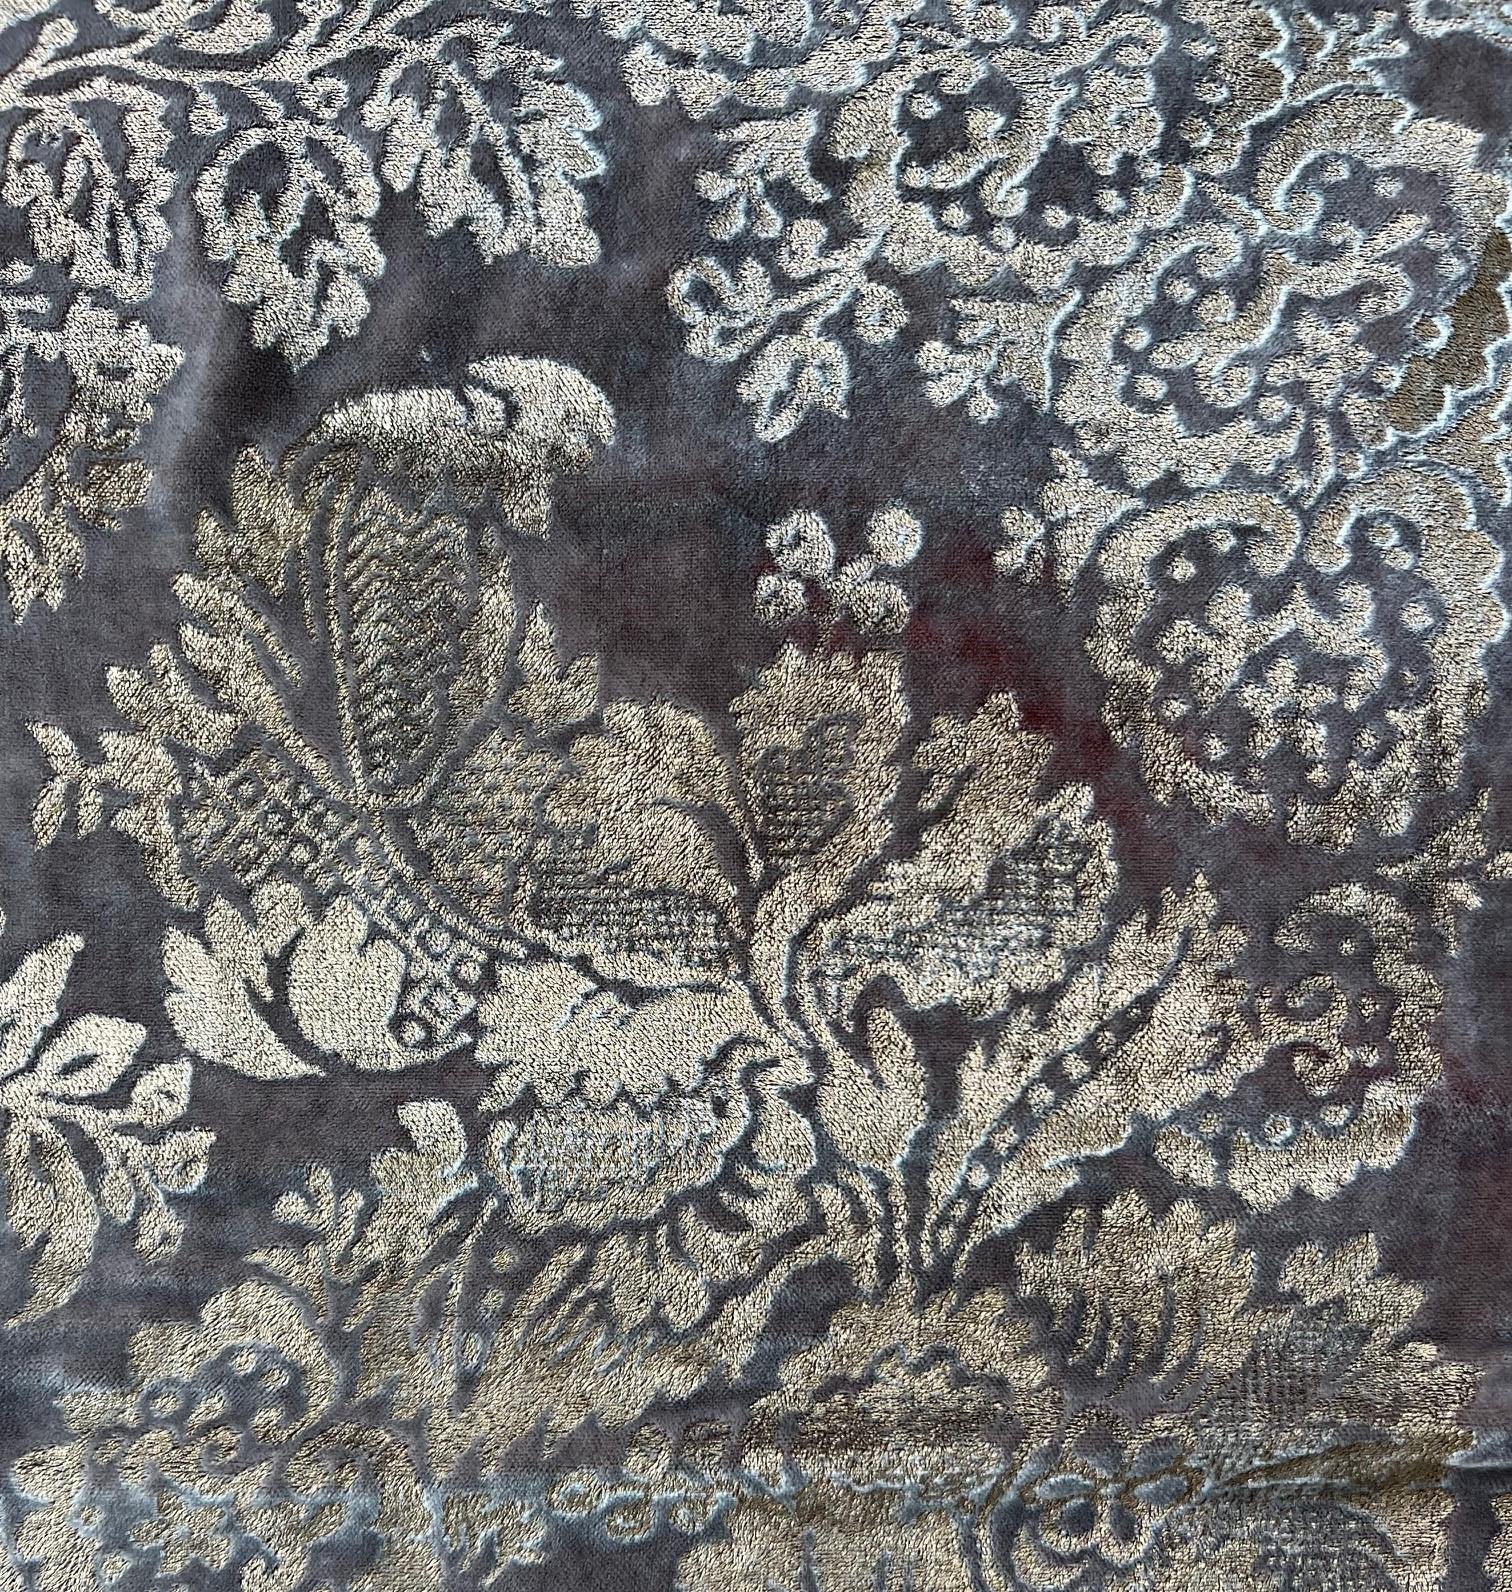 Rare Fortuny Silk Velvet in Warm French Brown, Stenciled with Pigmented Gold In Good Condition For Sale In Morristown, NJ